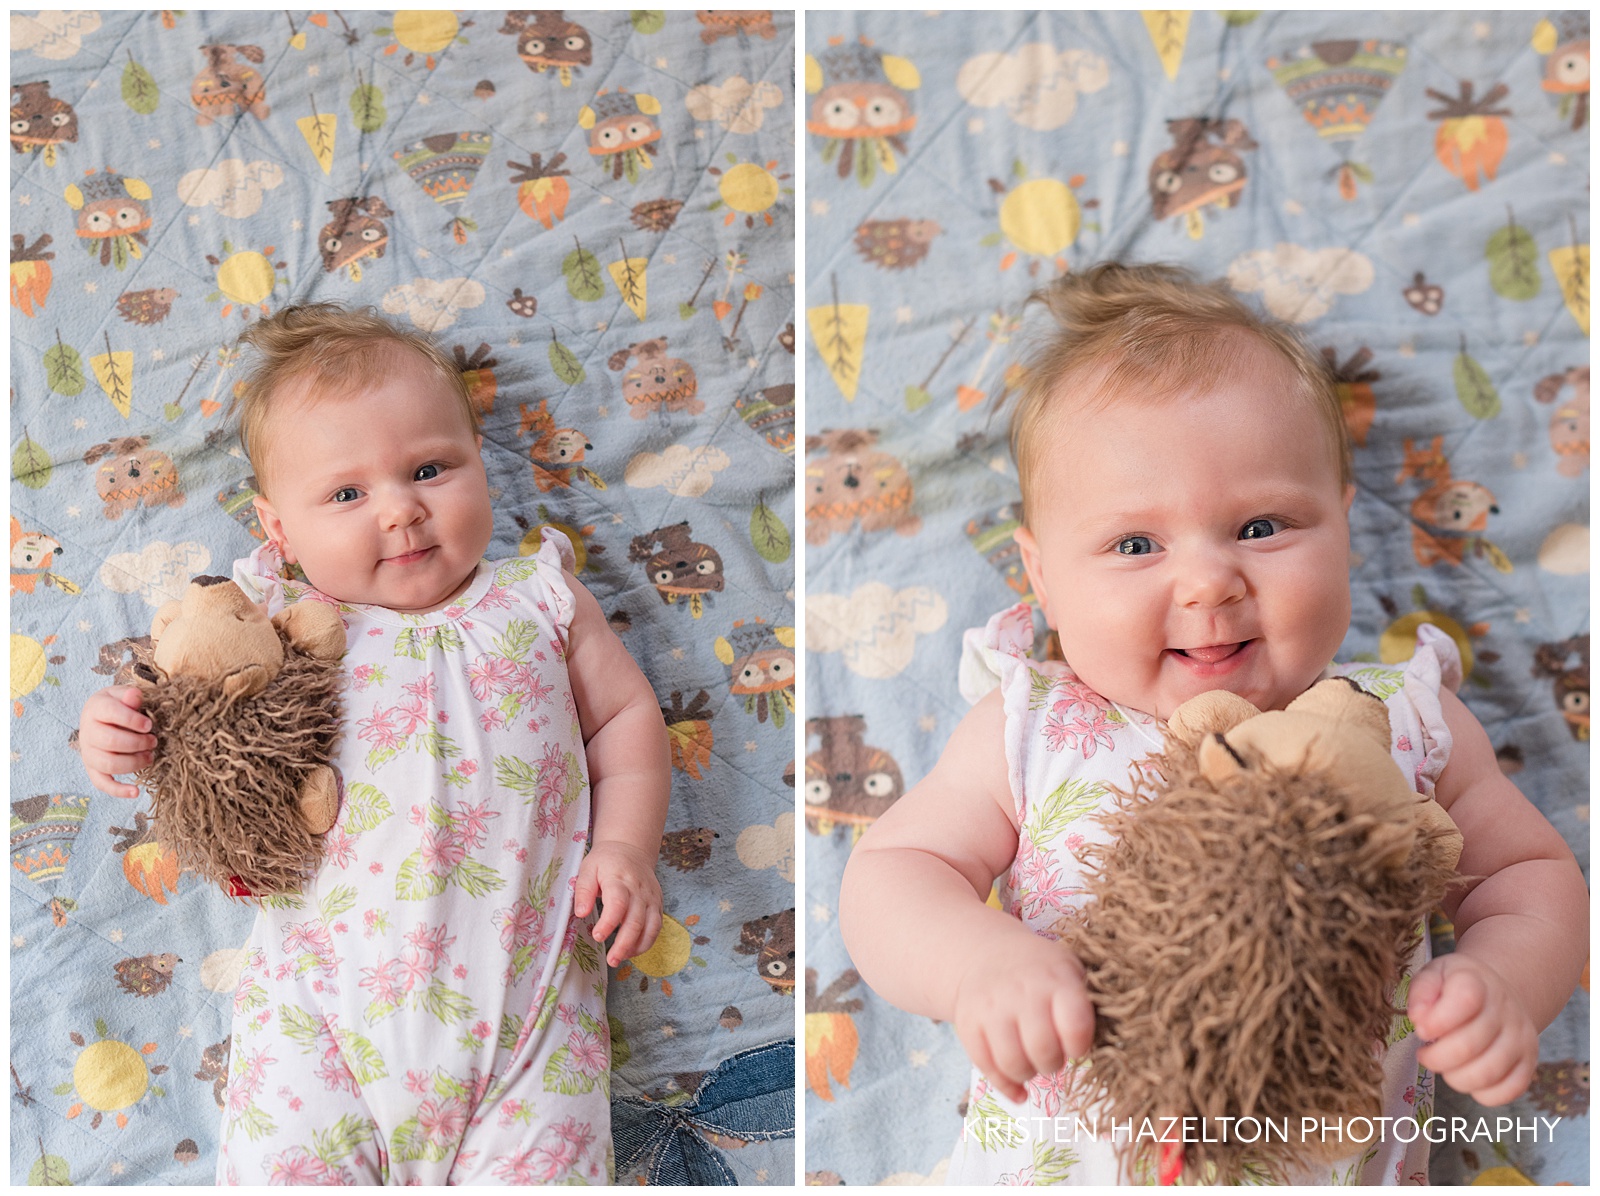 Happy four month old baby girl with a hedgehog stuffed animal